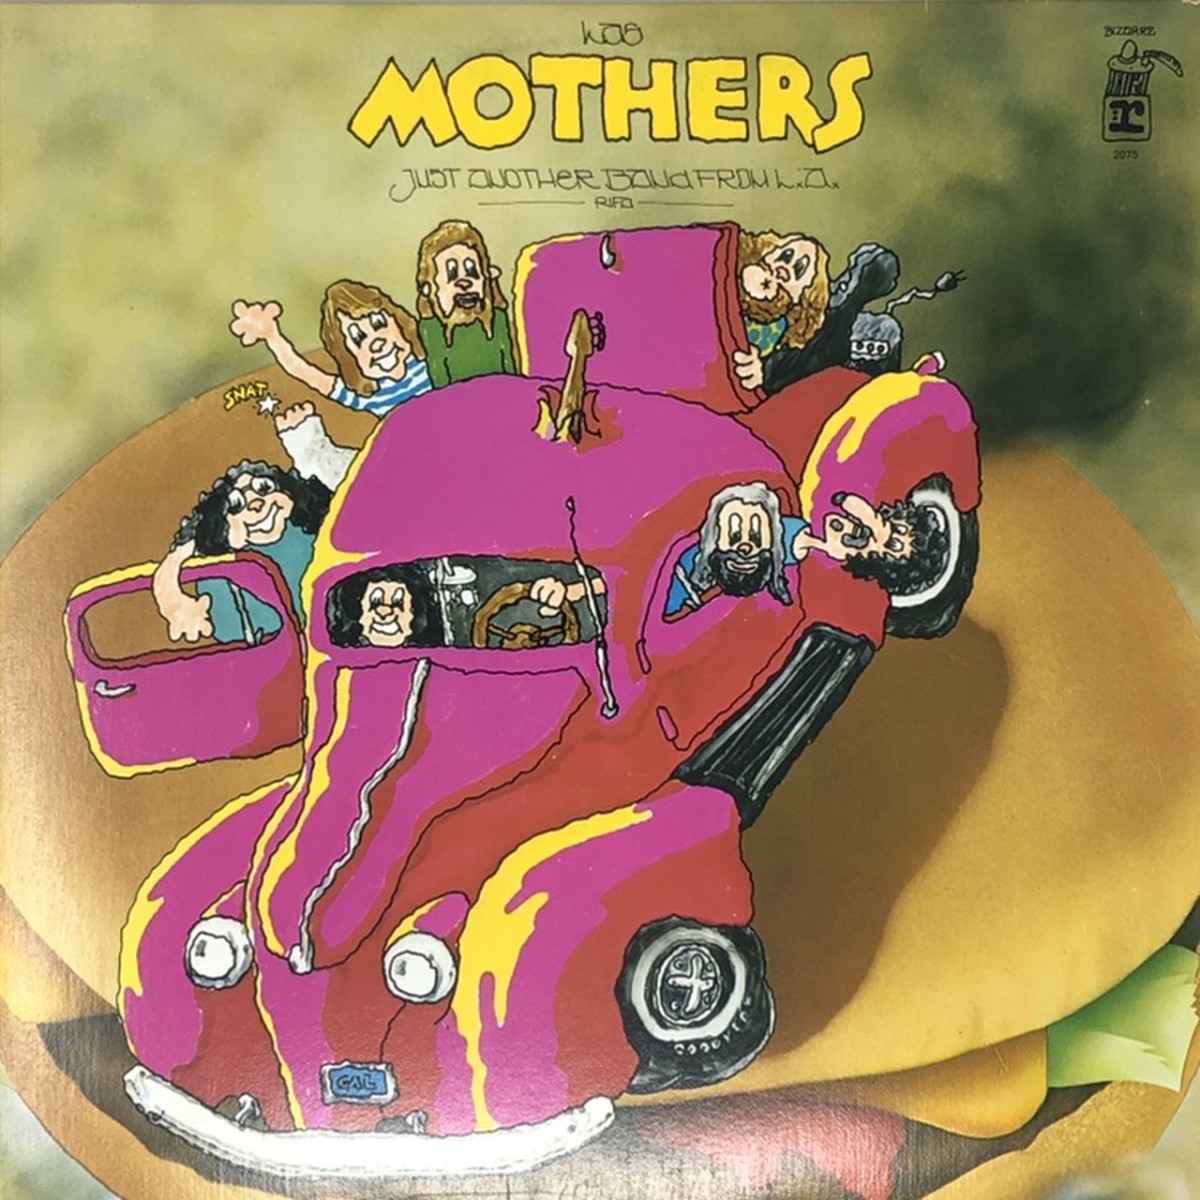 The Mothers – Just Another Band from LA